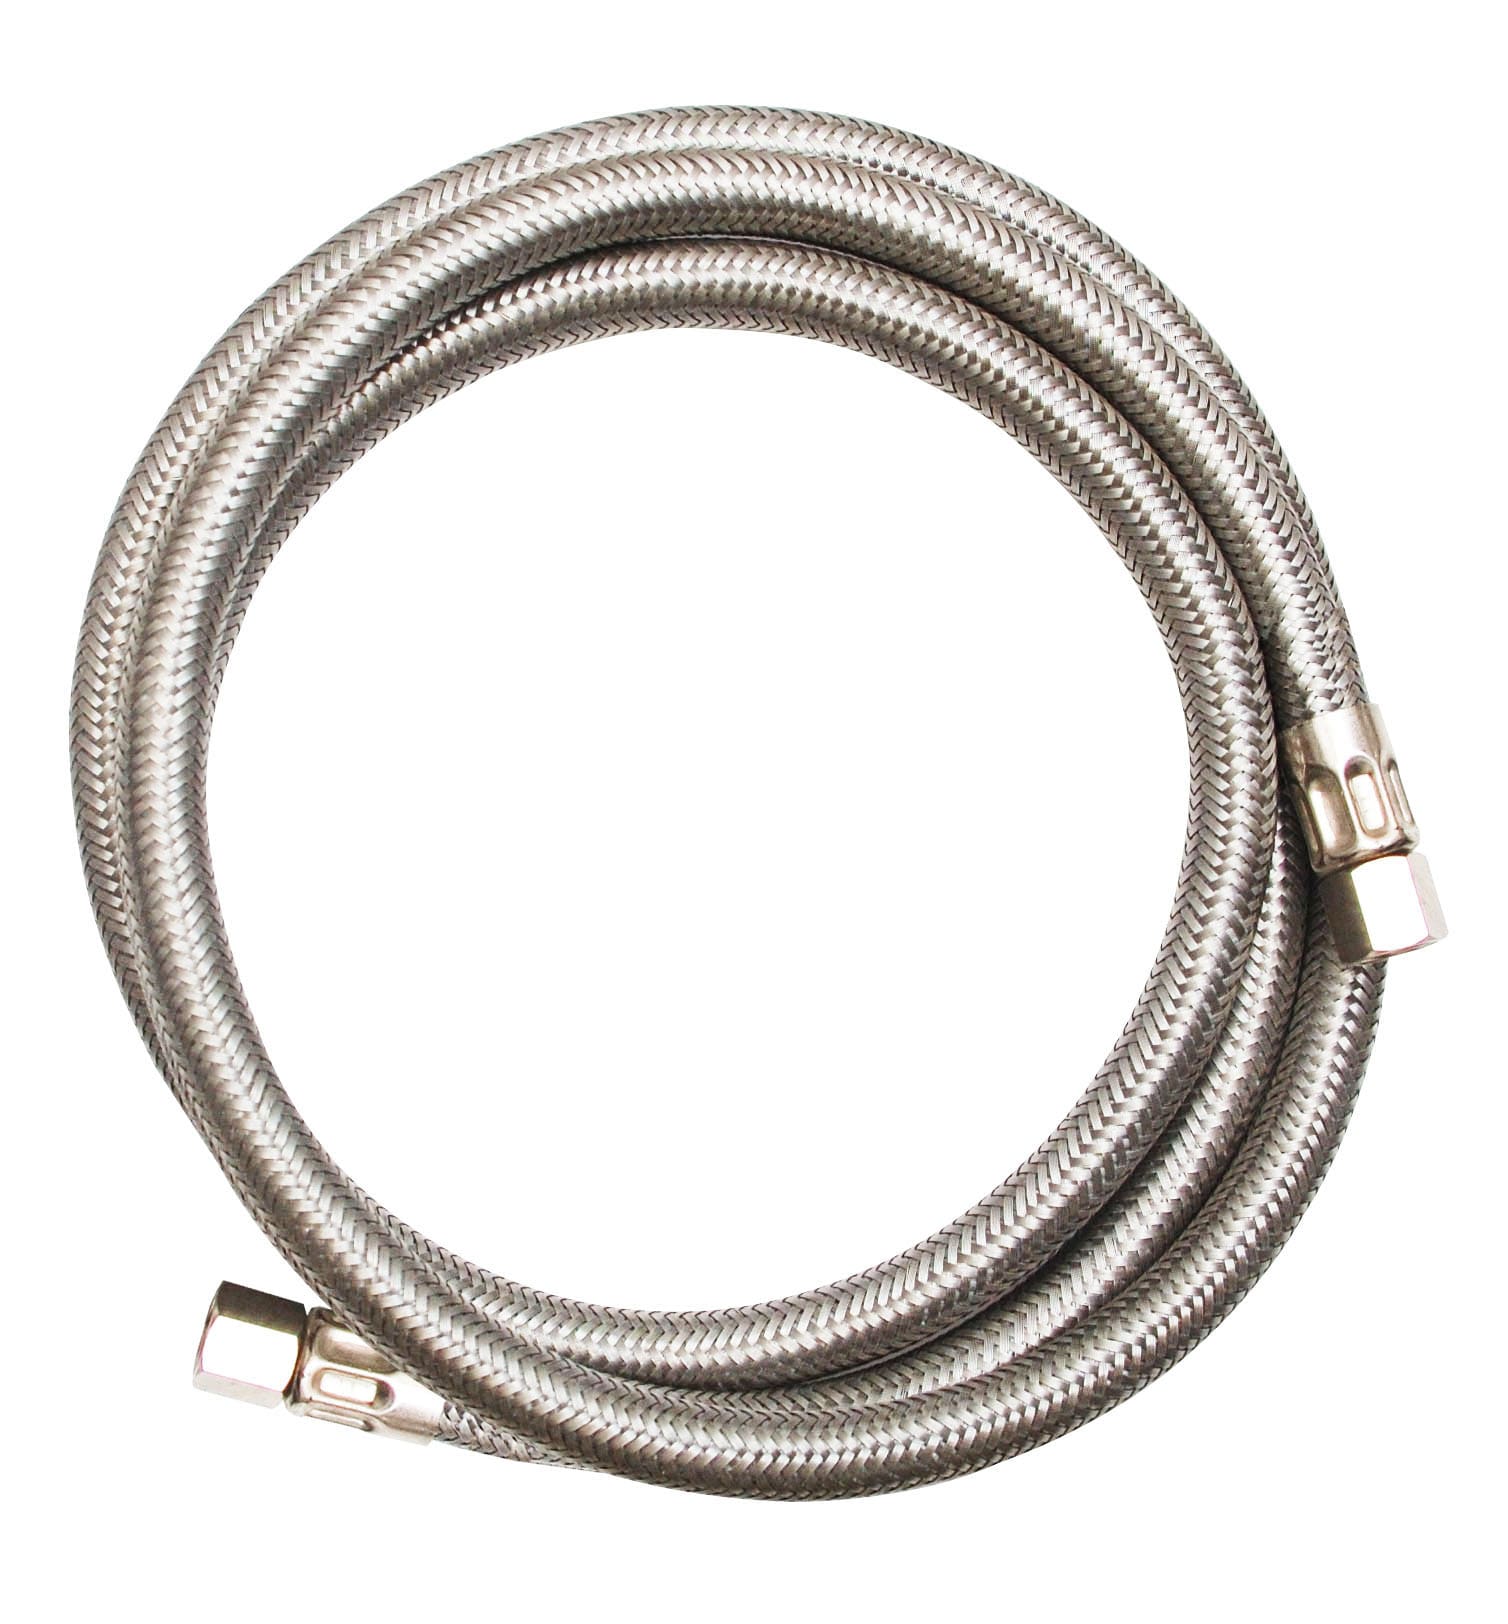 WLM Certified Appliance Im120ss Braided Stainless Steel Ice Maker Connector 10ft 